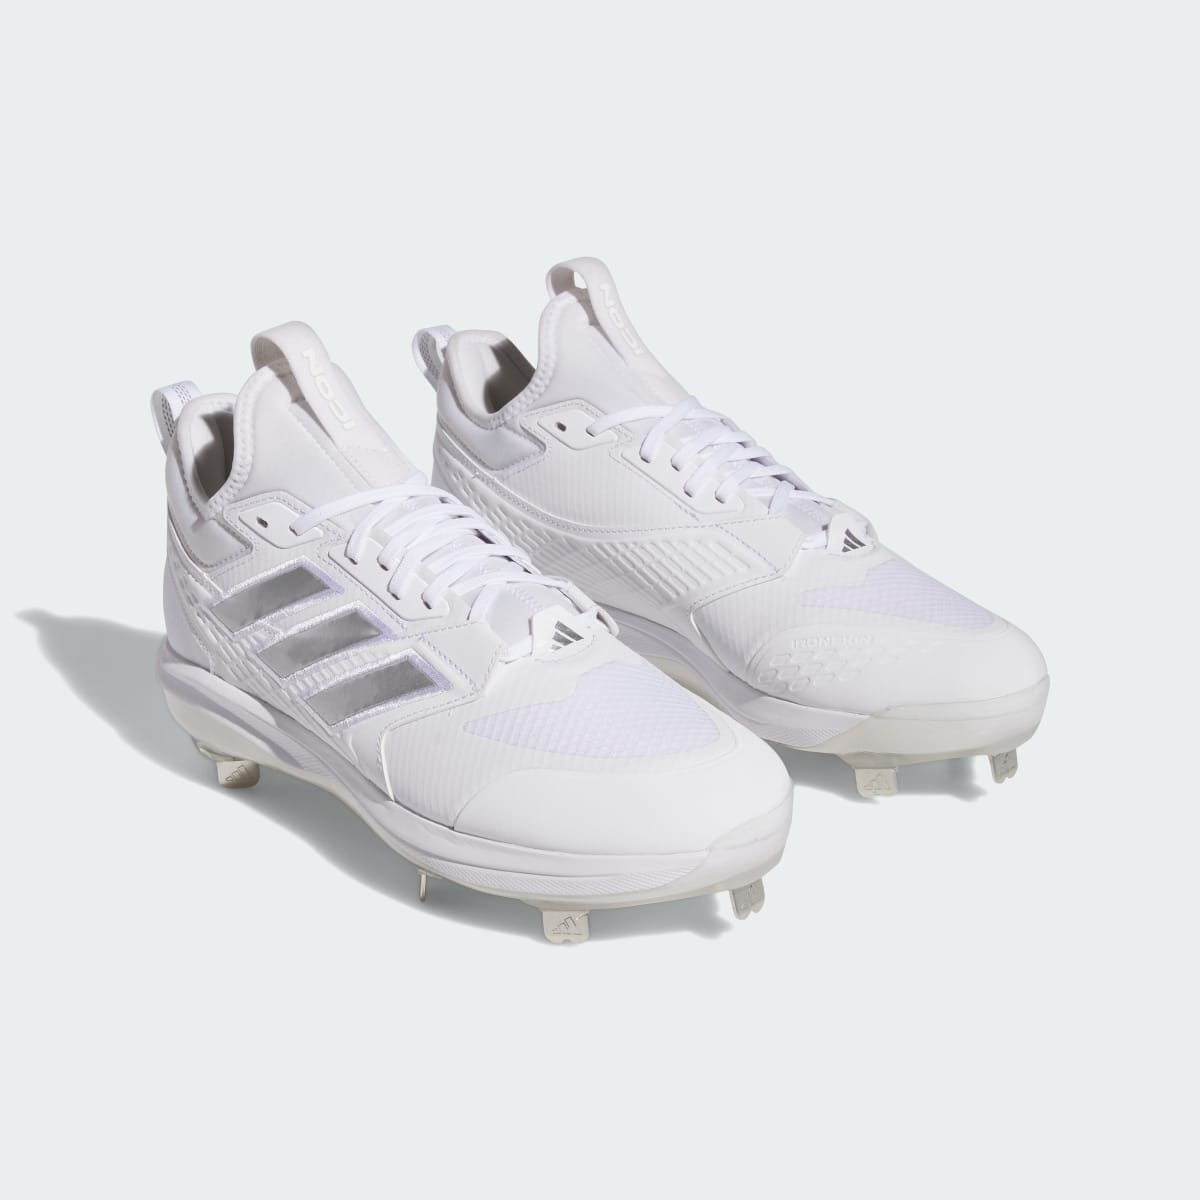 Adidas Icon 8 BOOST Cleats. 5